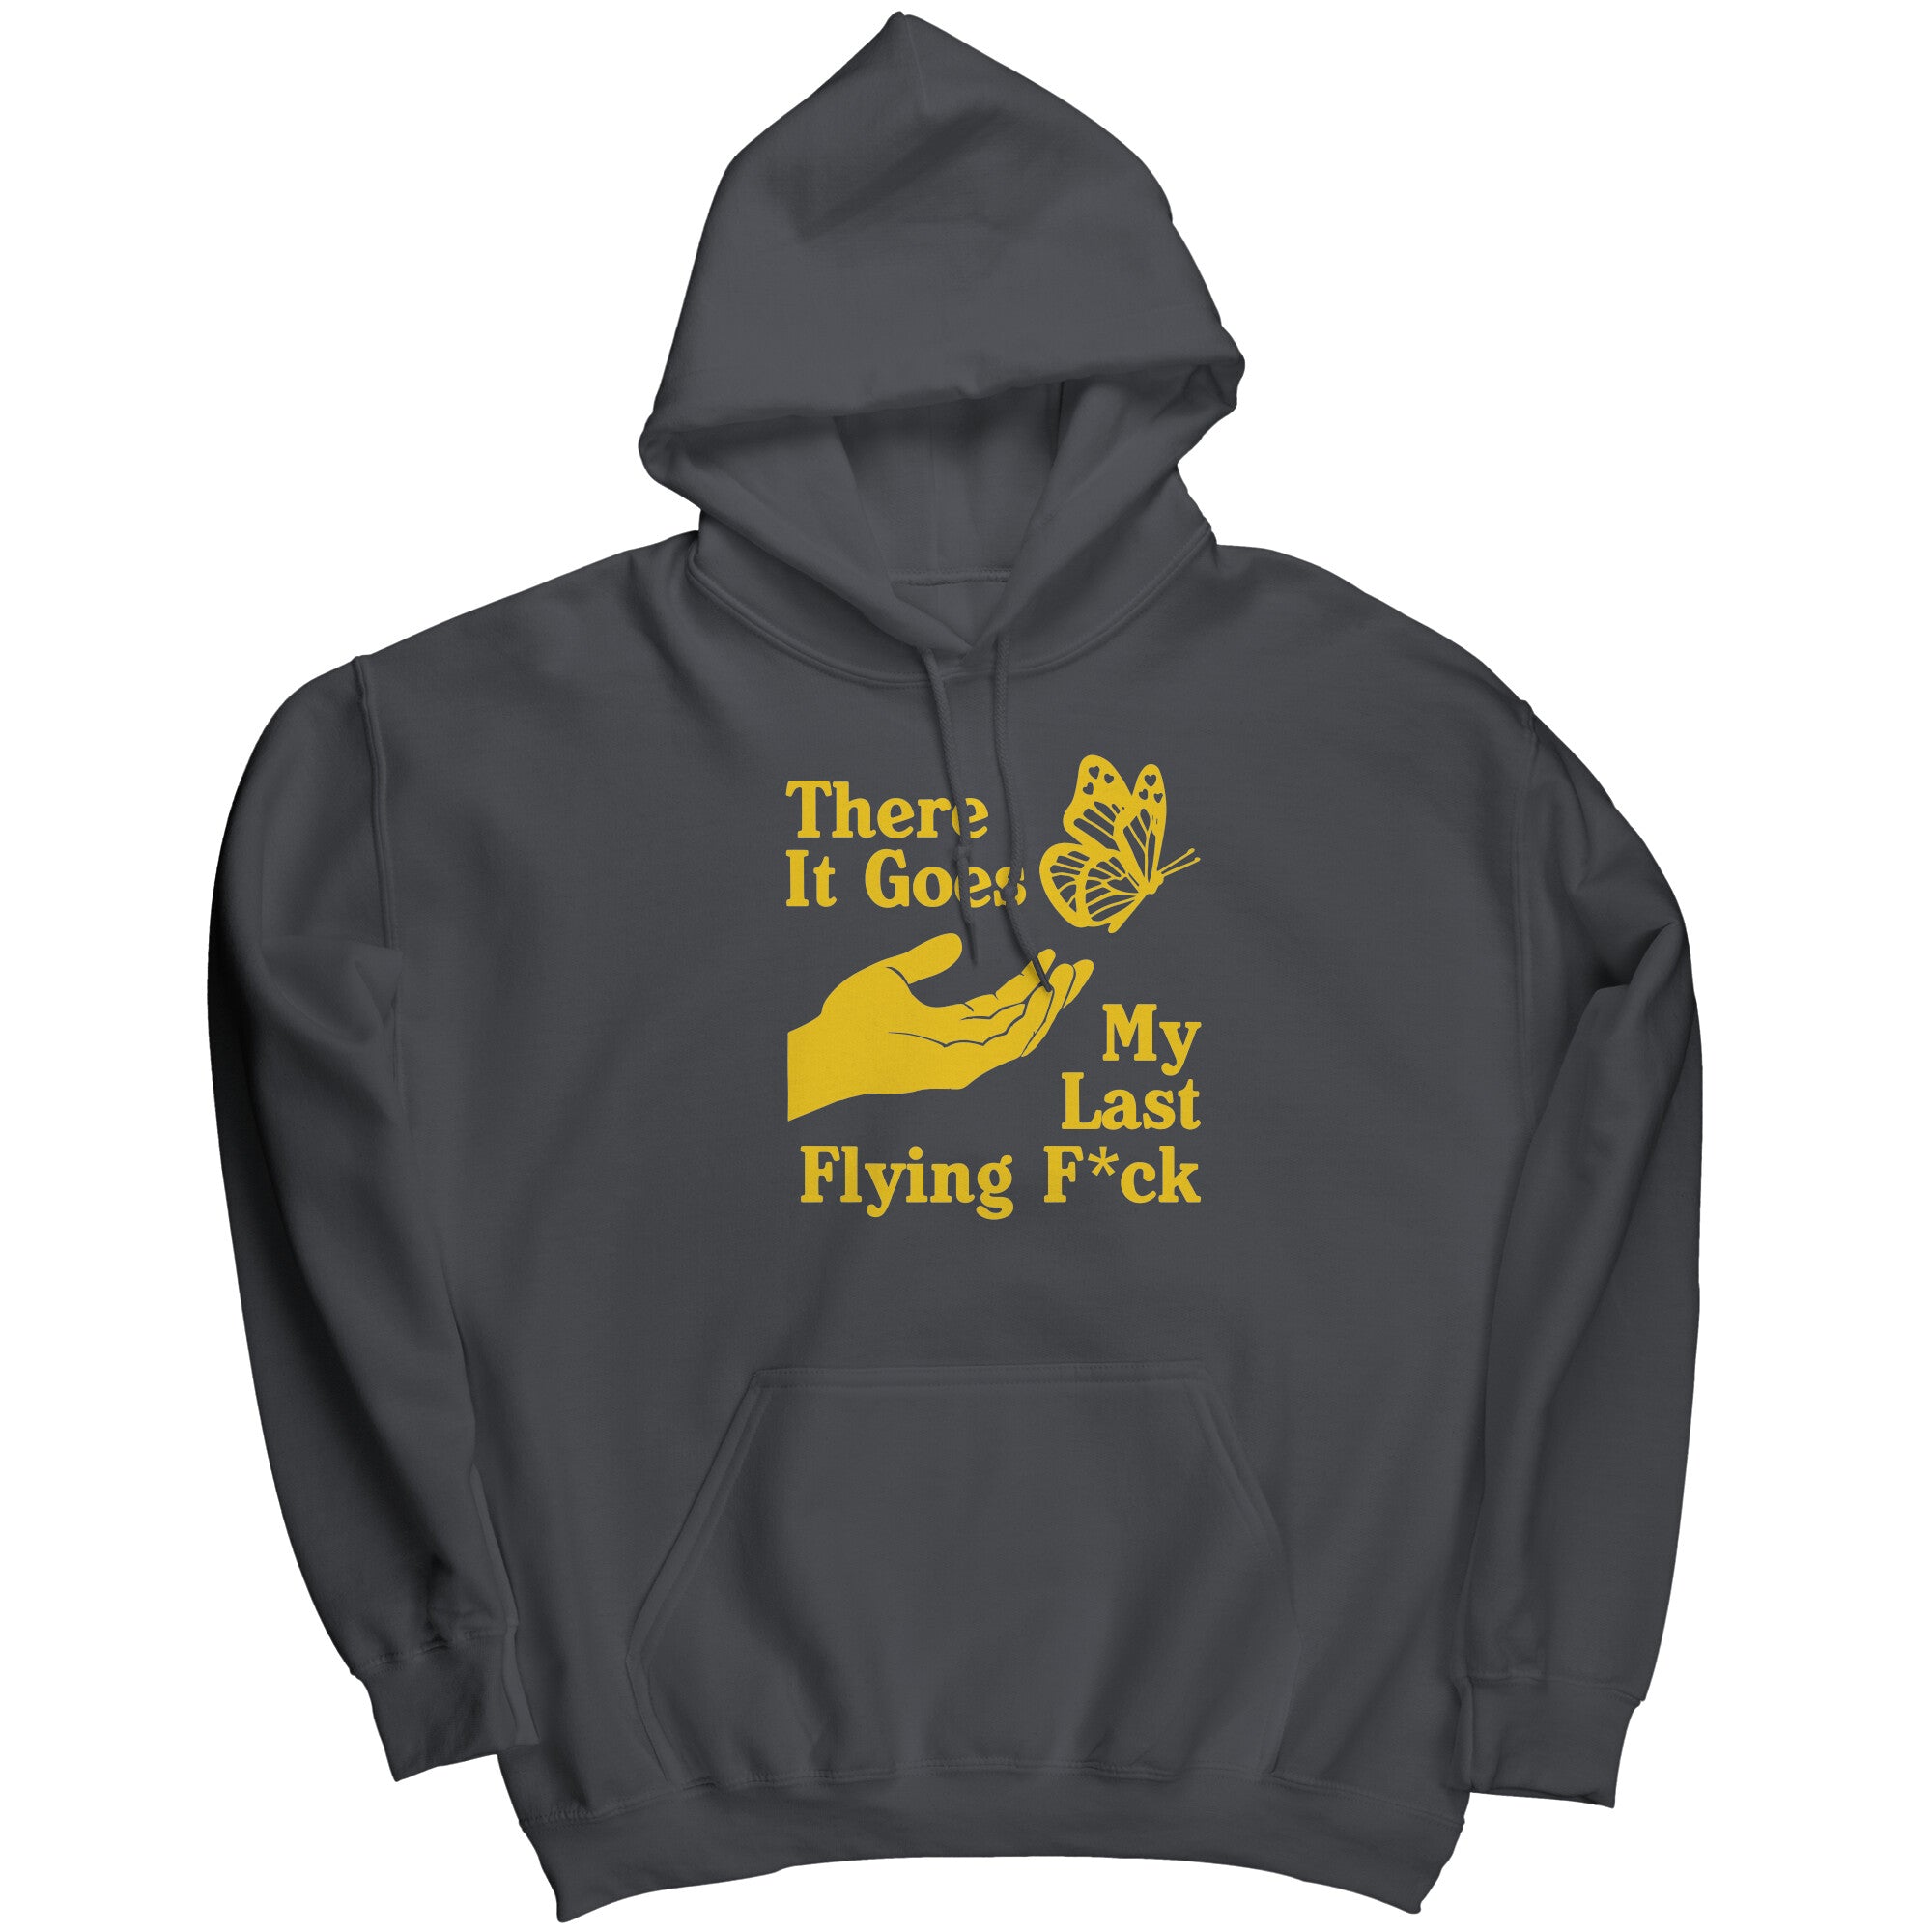 There It Goes My Last Flying F*ck -Apparel | Drunk America 